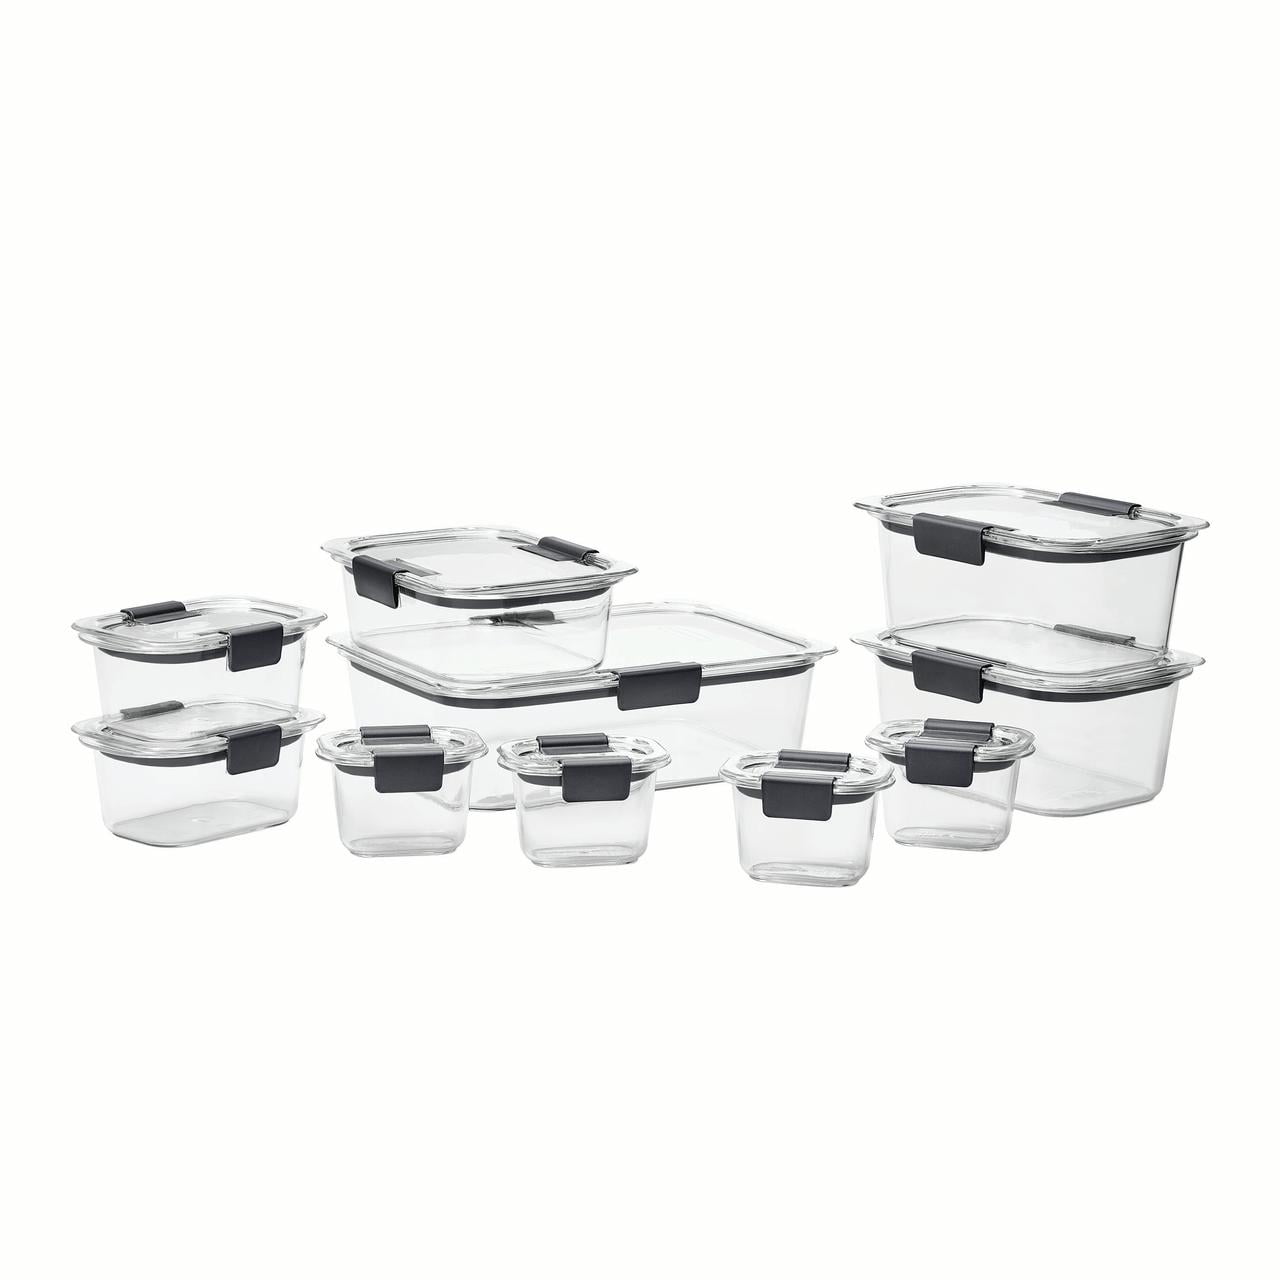 Rubbermaid Brilliance Food Storage Container, 20 Piece Set, New, Open Box